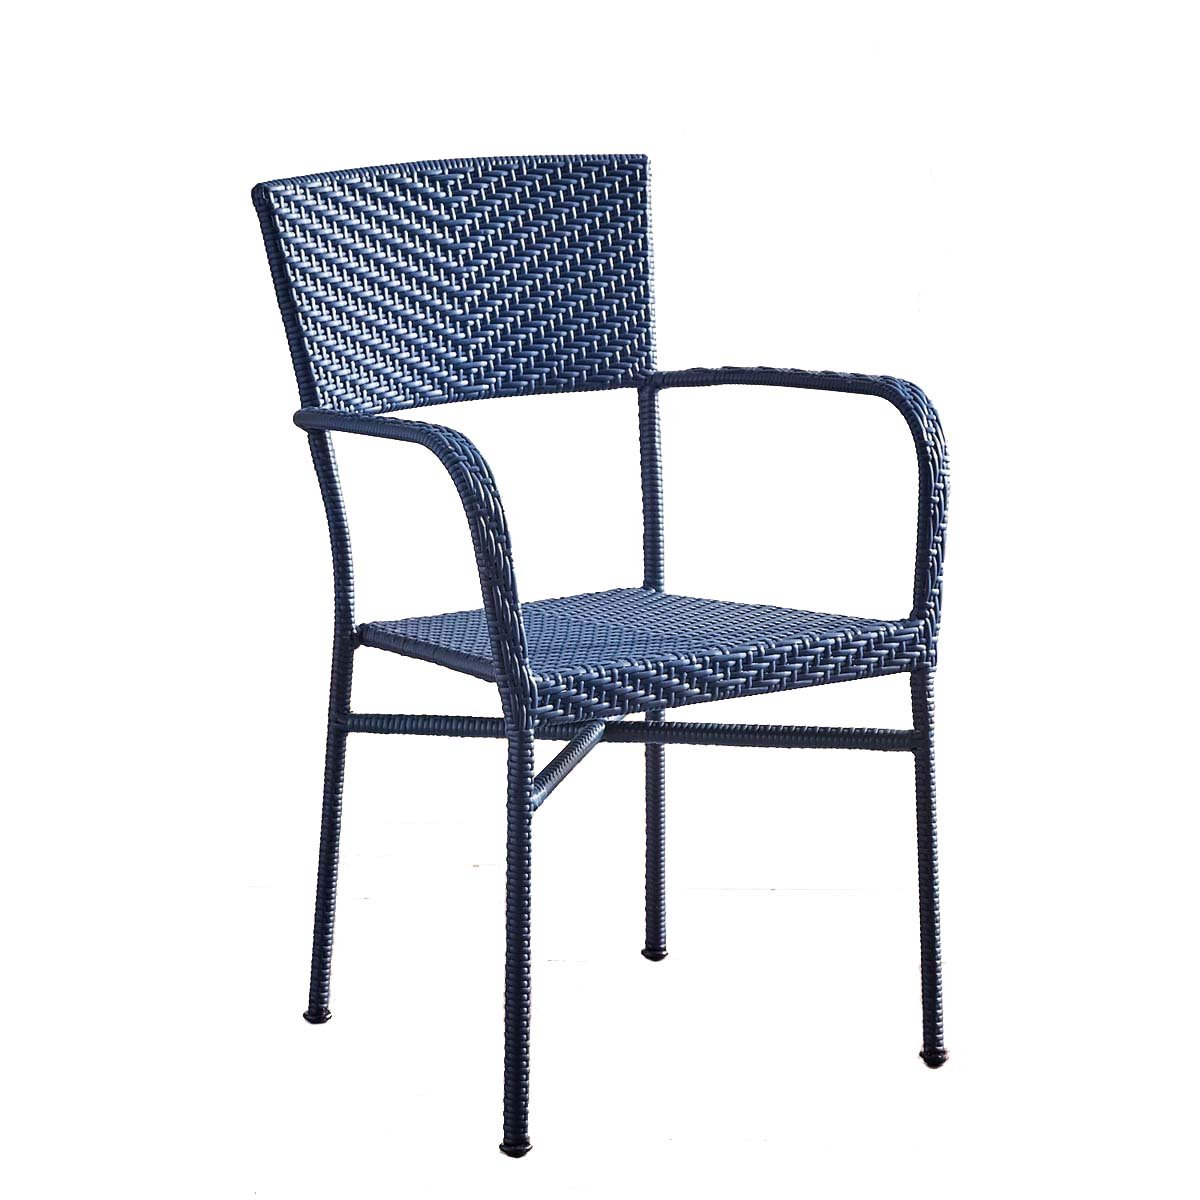 Silla Stack Navy Pier 1 Imports